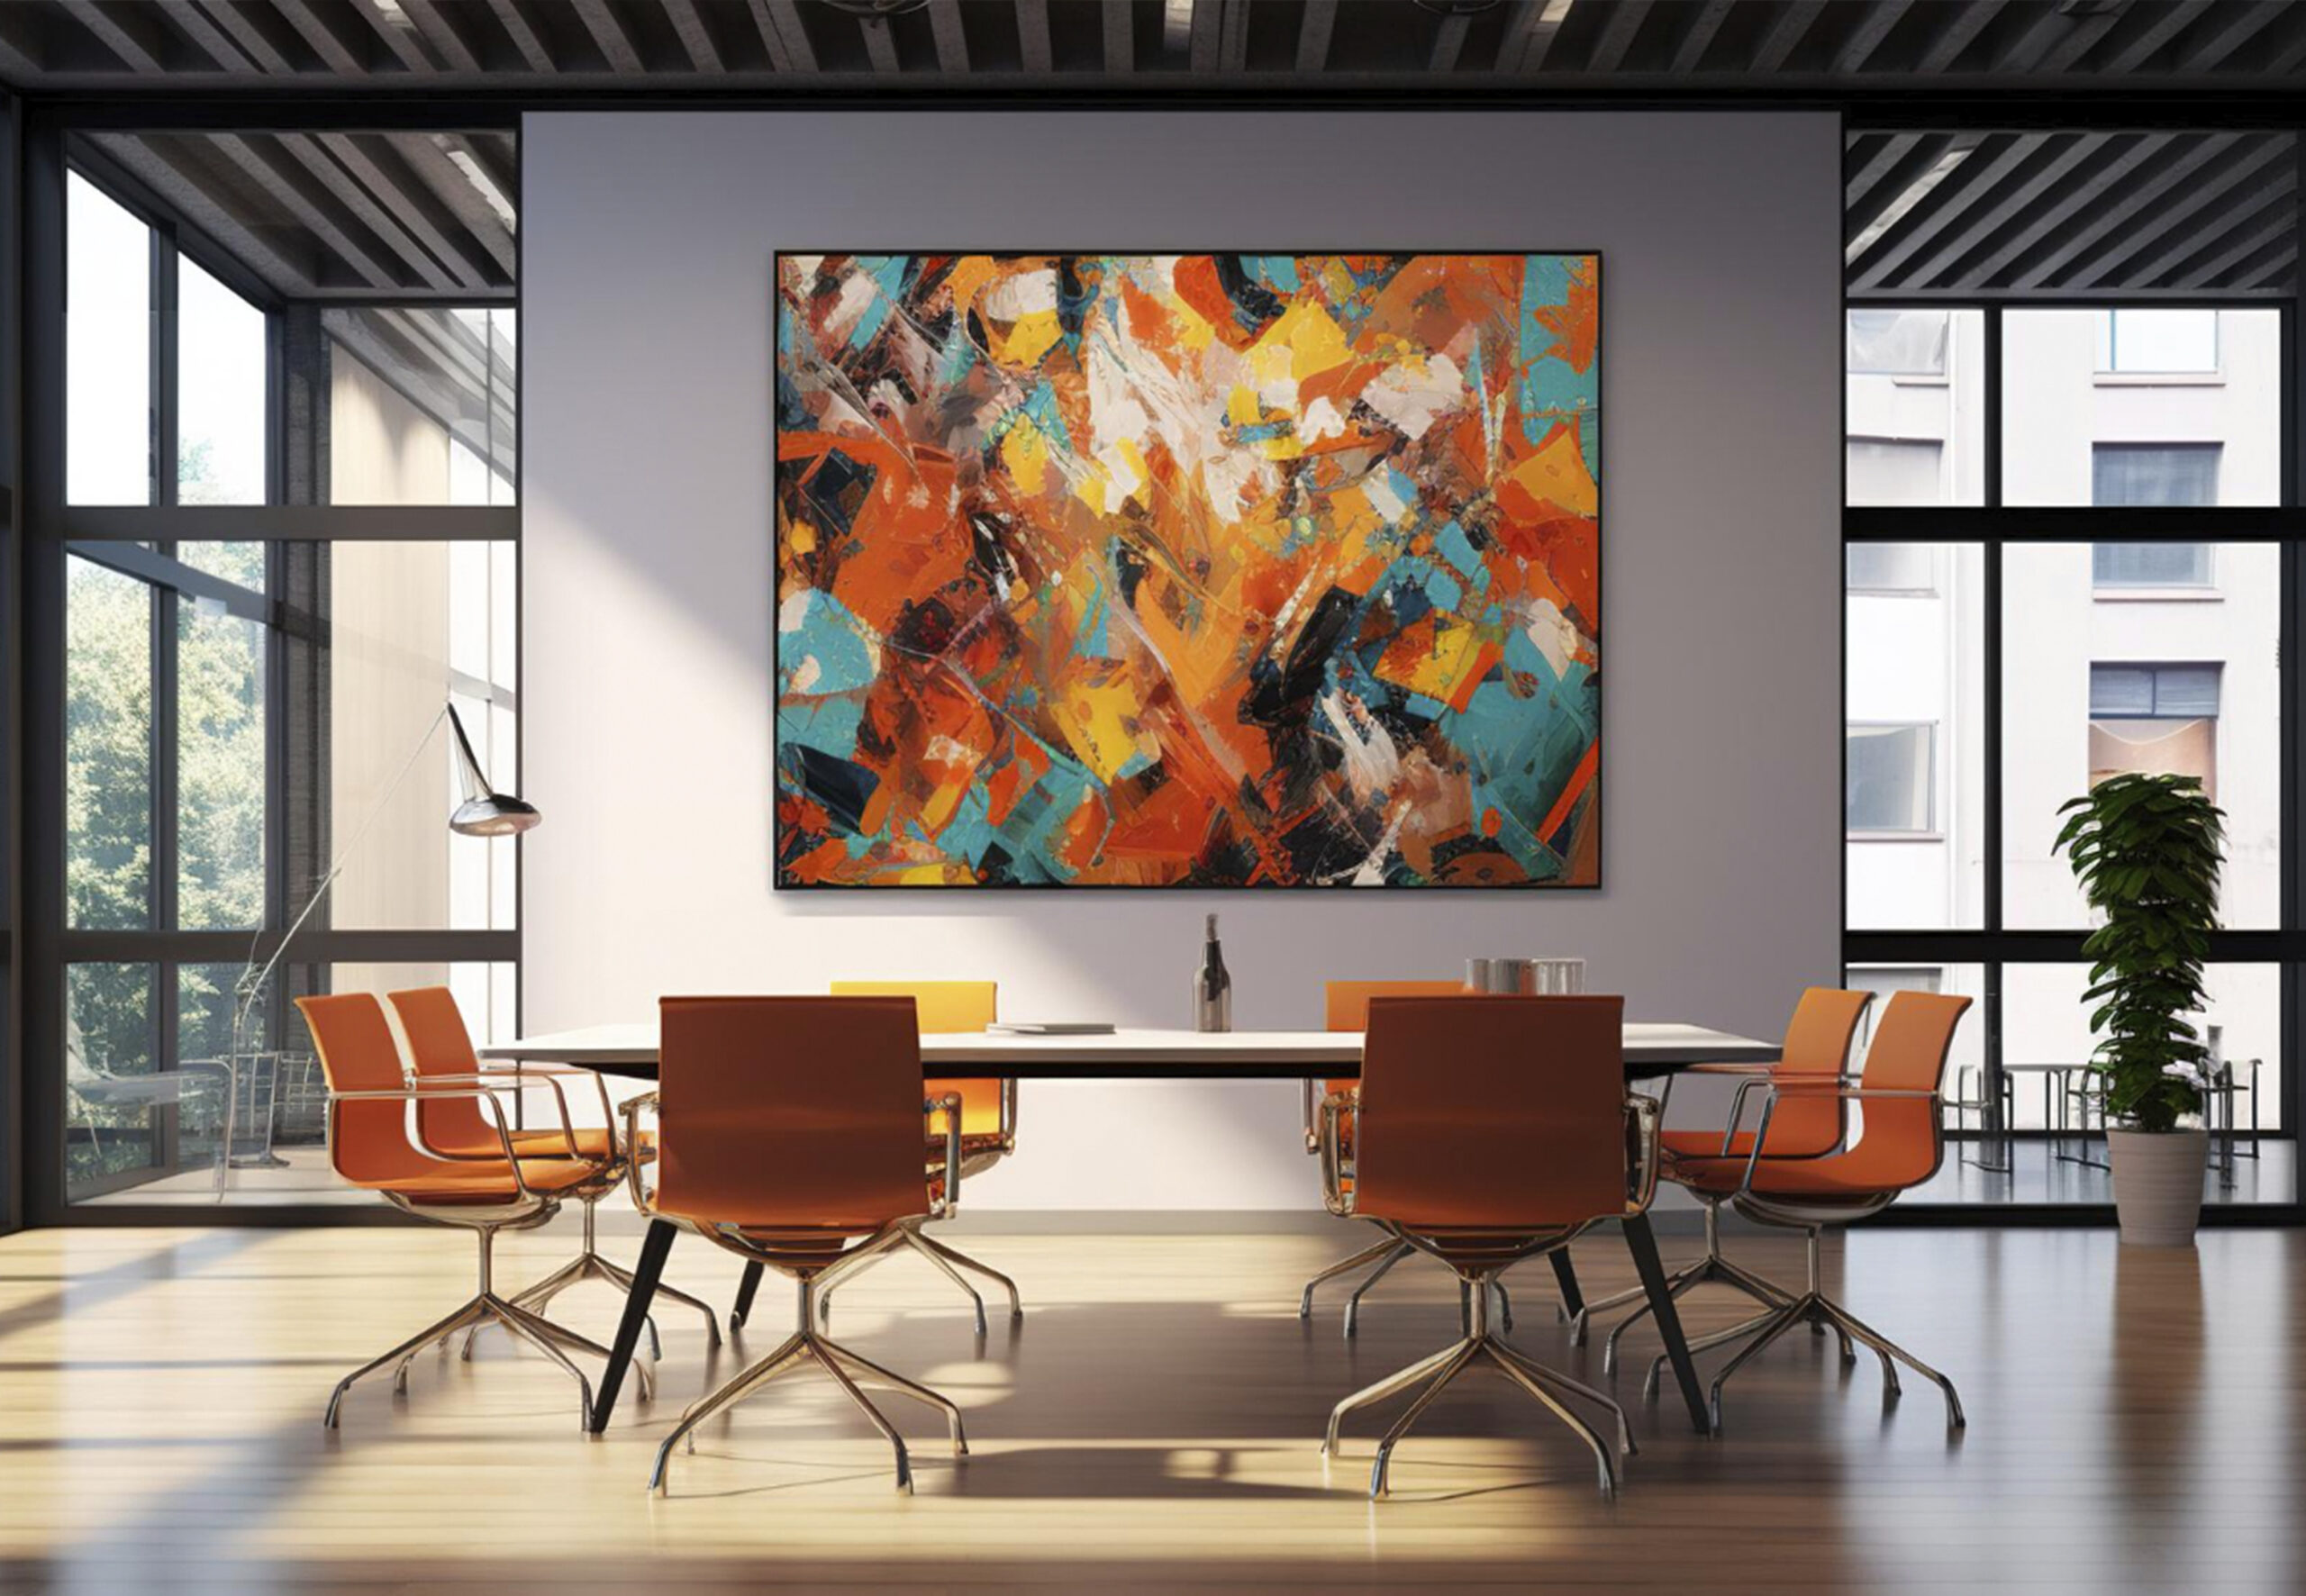 Office Wall Art: Is Your Corporate Art Sending the Right Message